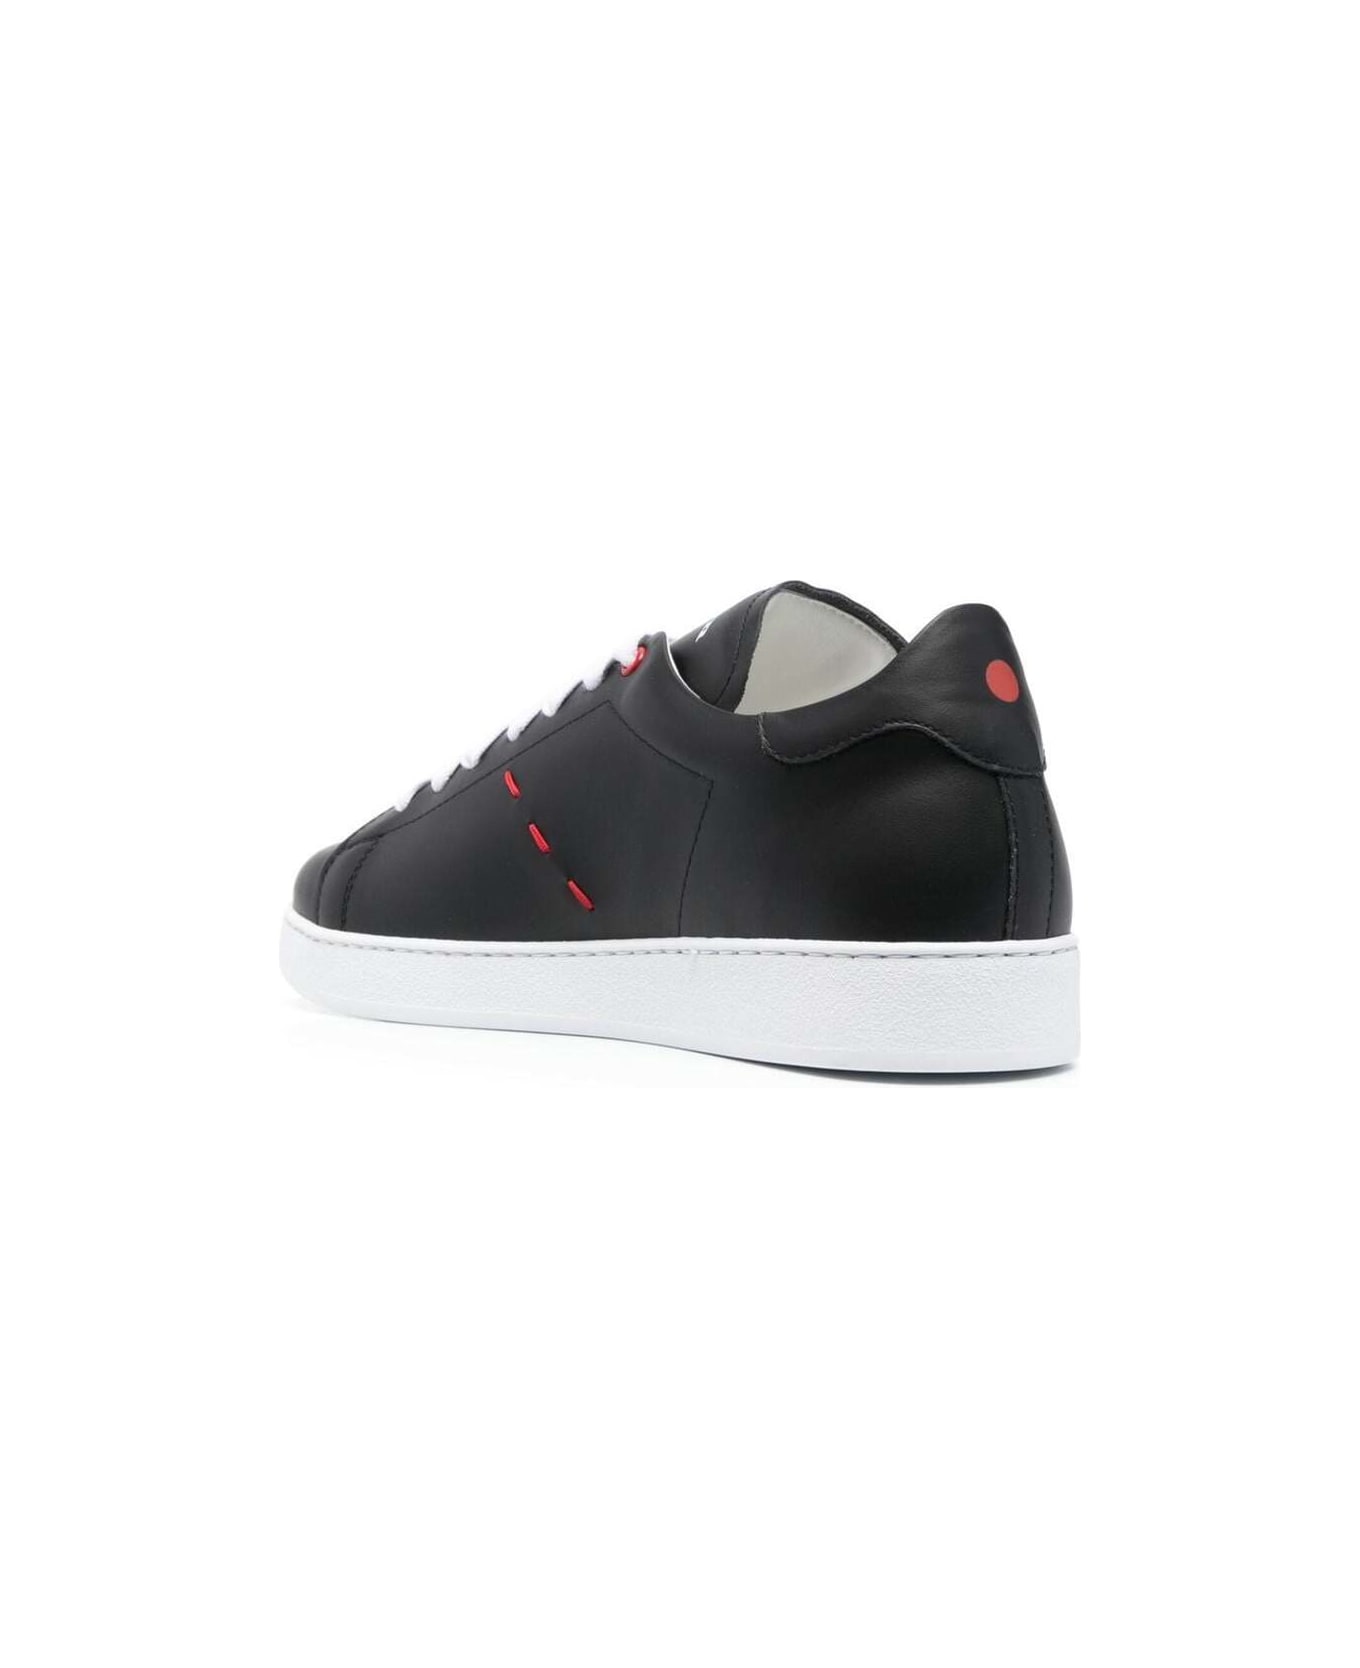 Kiton Black Sneakers With Contrasting Stitching In Calf Leather Man - Black